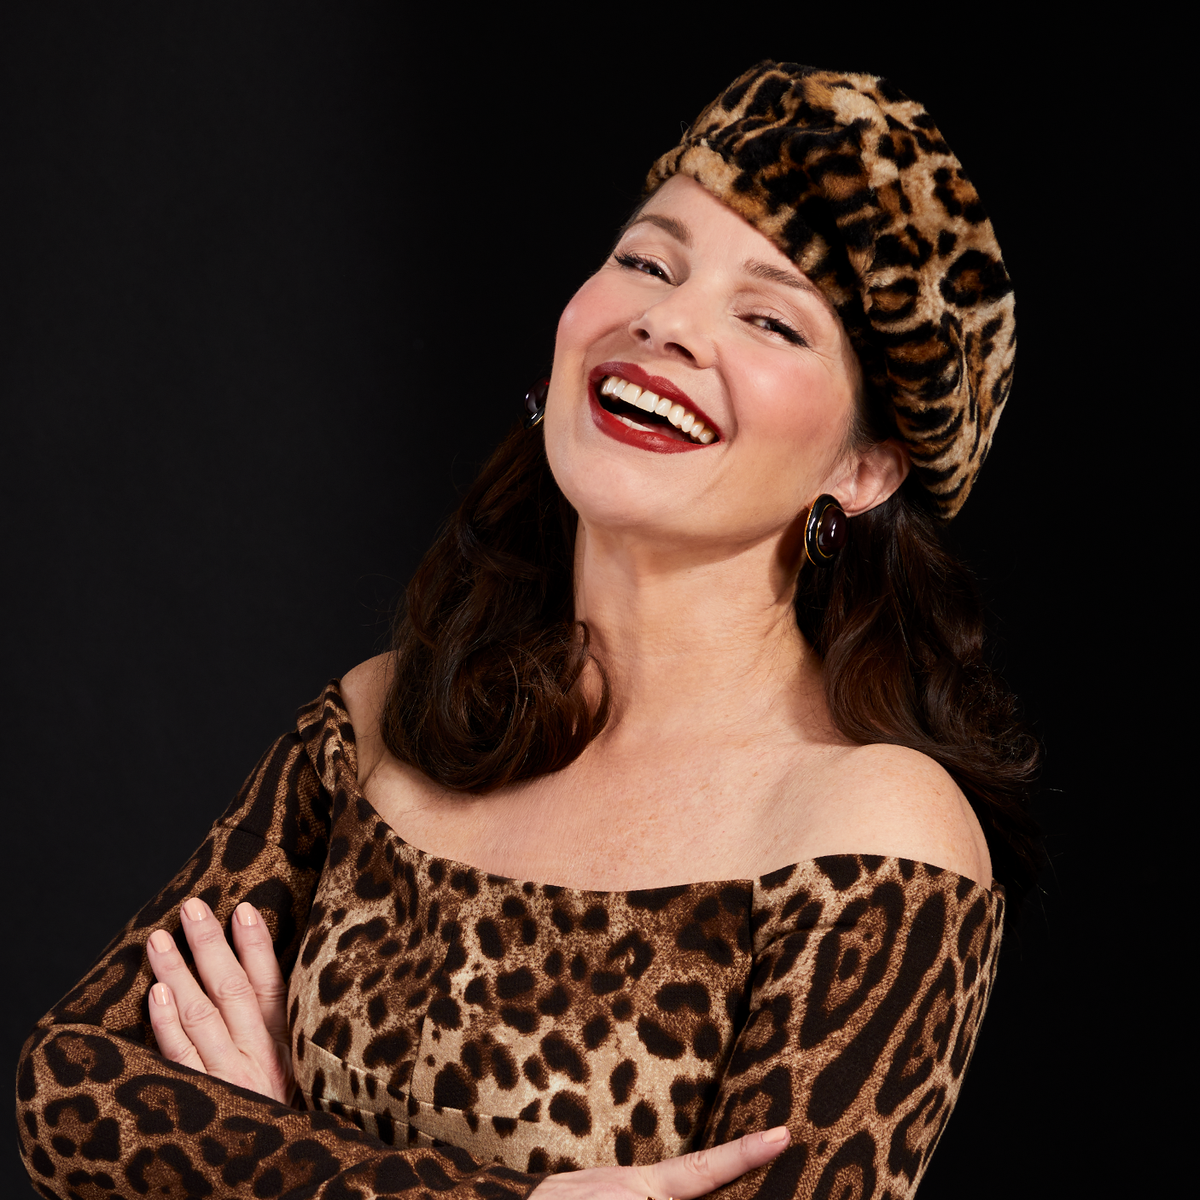 Fran Drescher Hairy Pussy - Fran Drescher on The Nanny Fashion, Cancer Recovery, and Being Friends with  her Ex